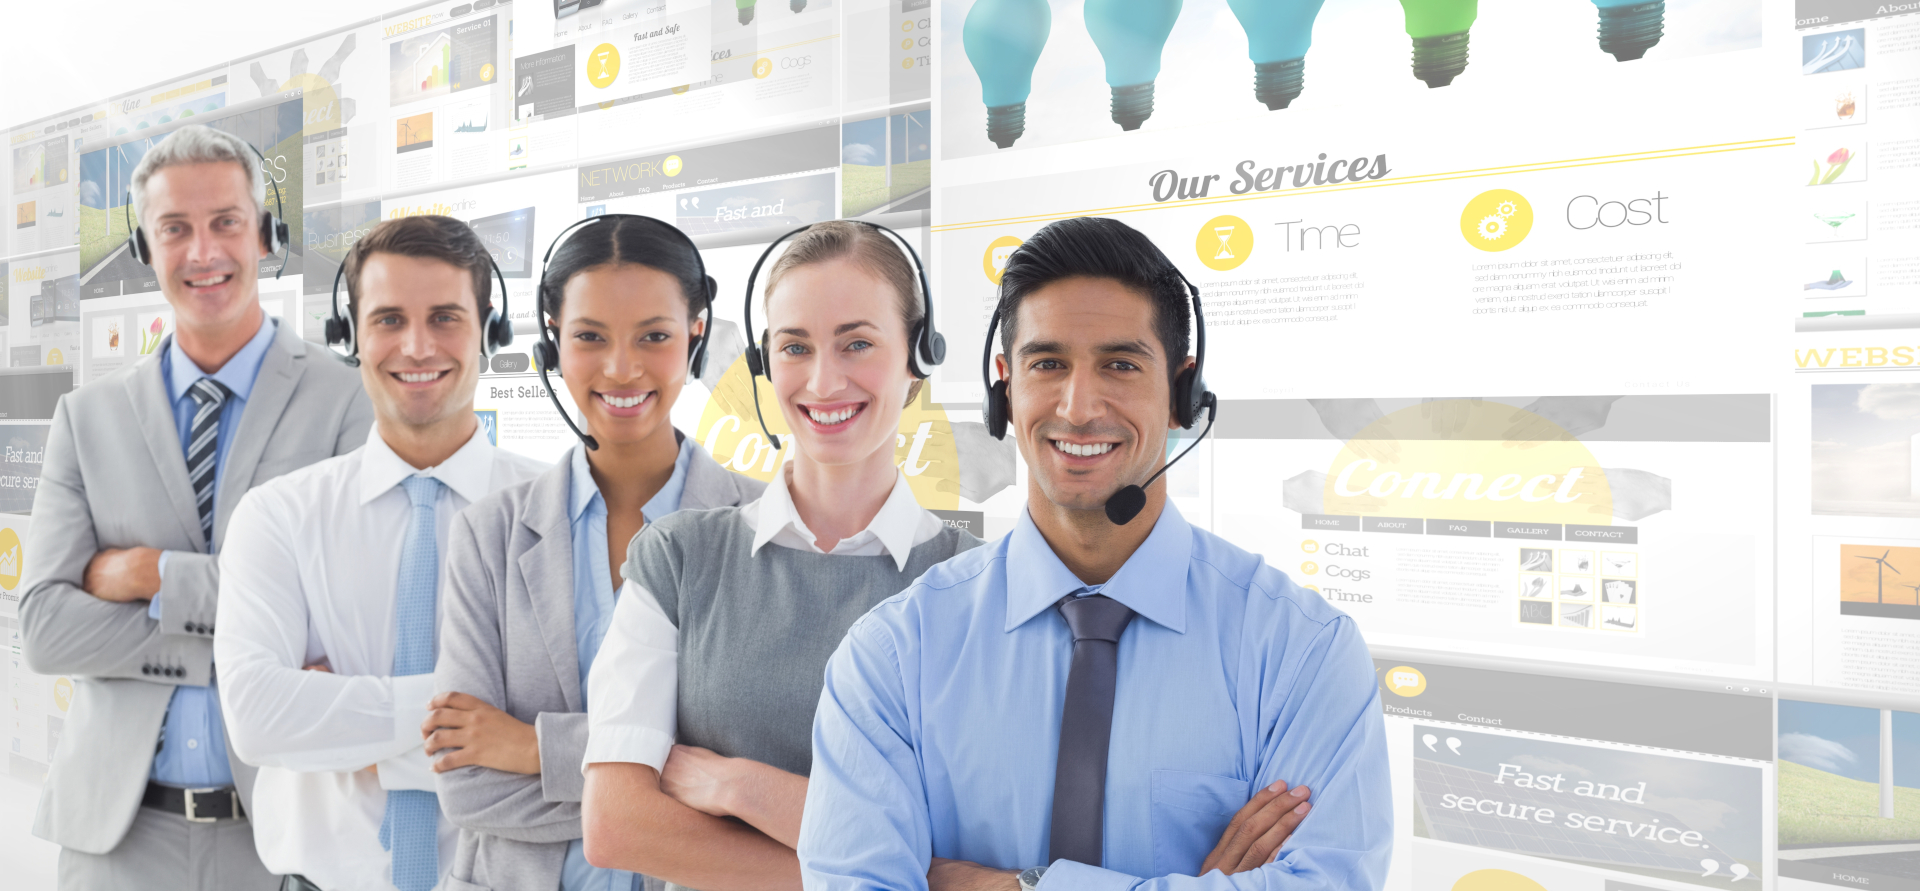 Customer Service Outsourcing with Atlas BPO